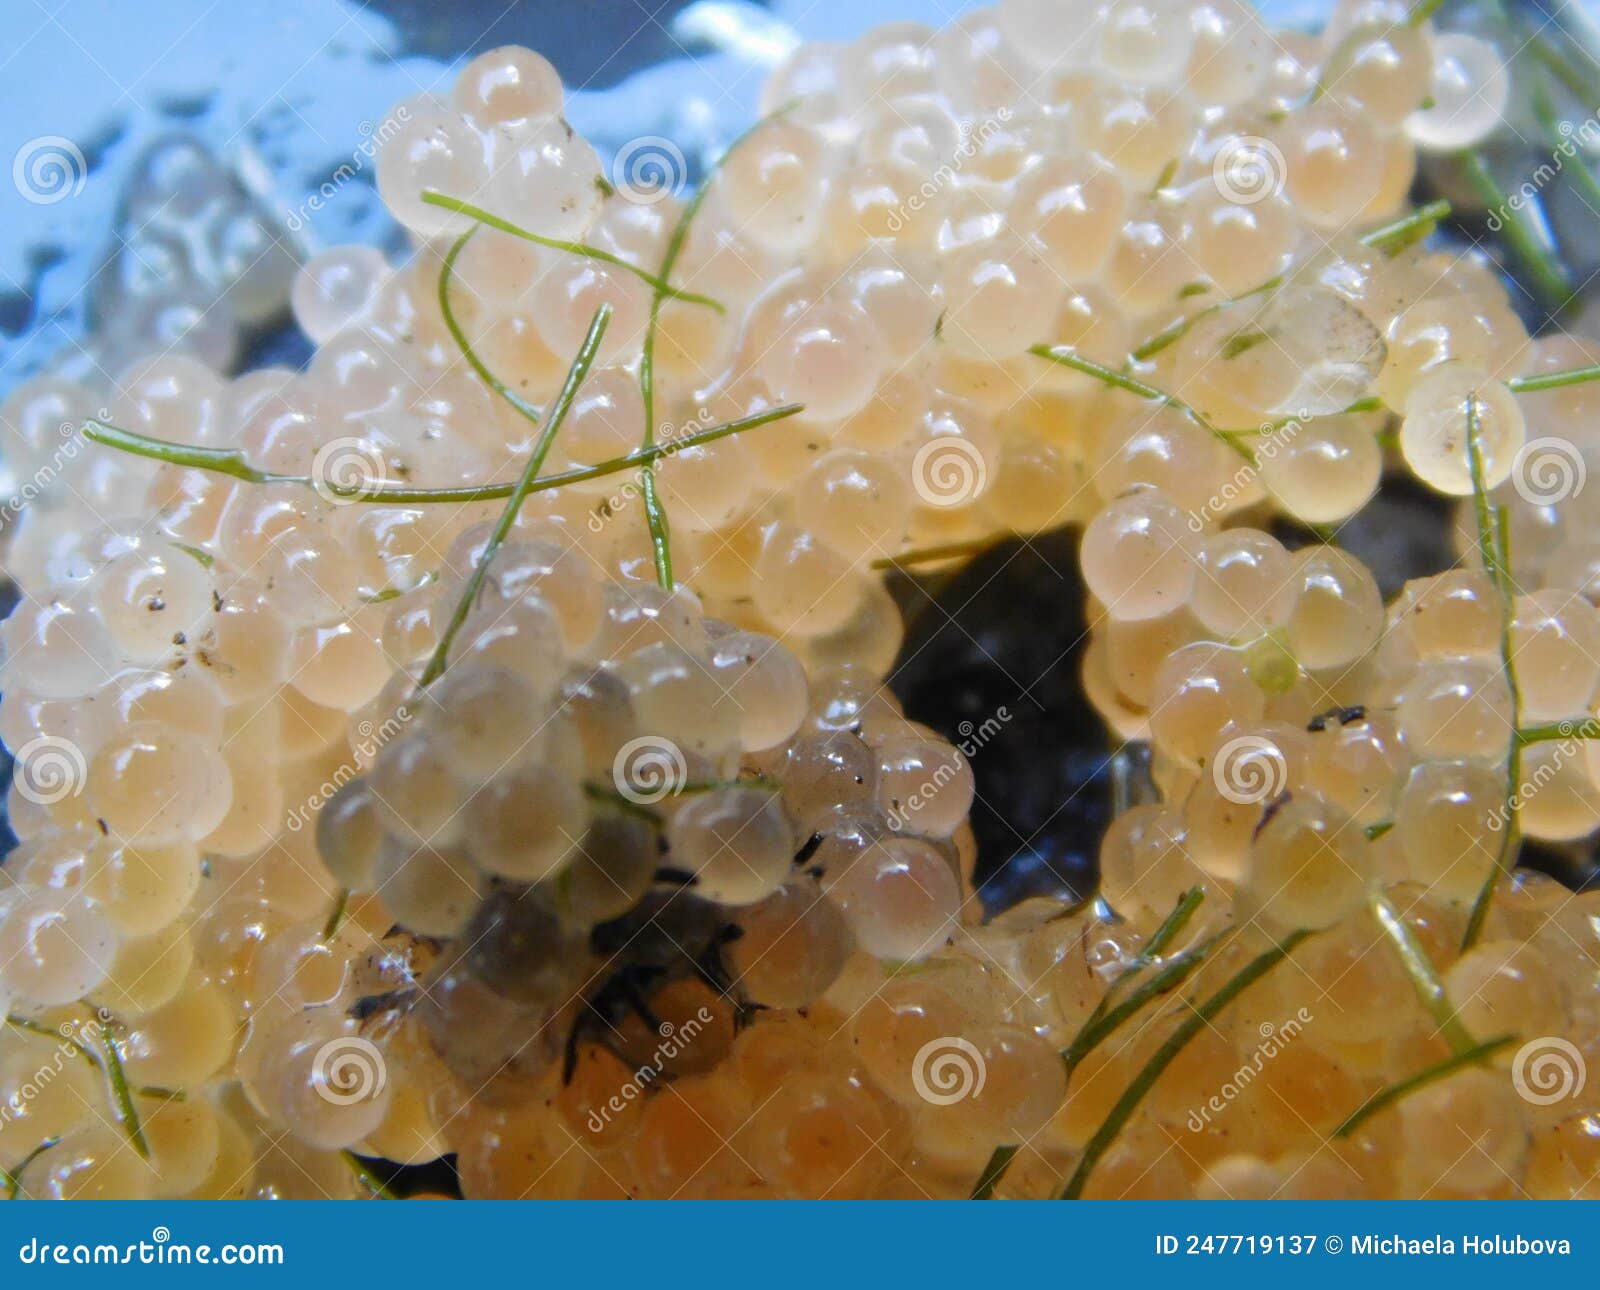 Fish Eggs Female Reproductive Cells Stock Image - Image of dermal,  ichthyology: 247719137